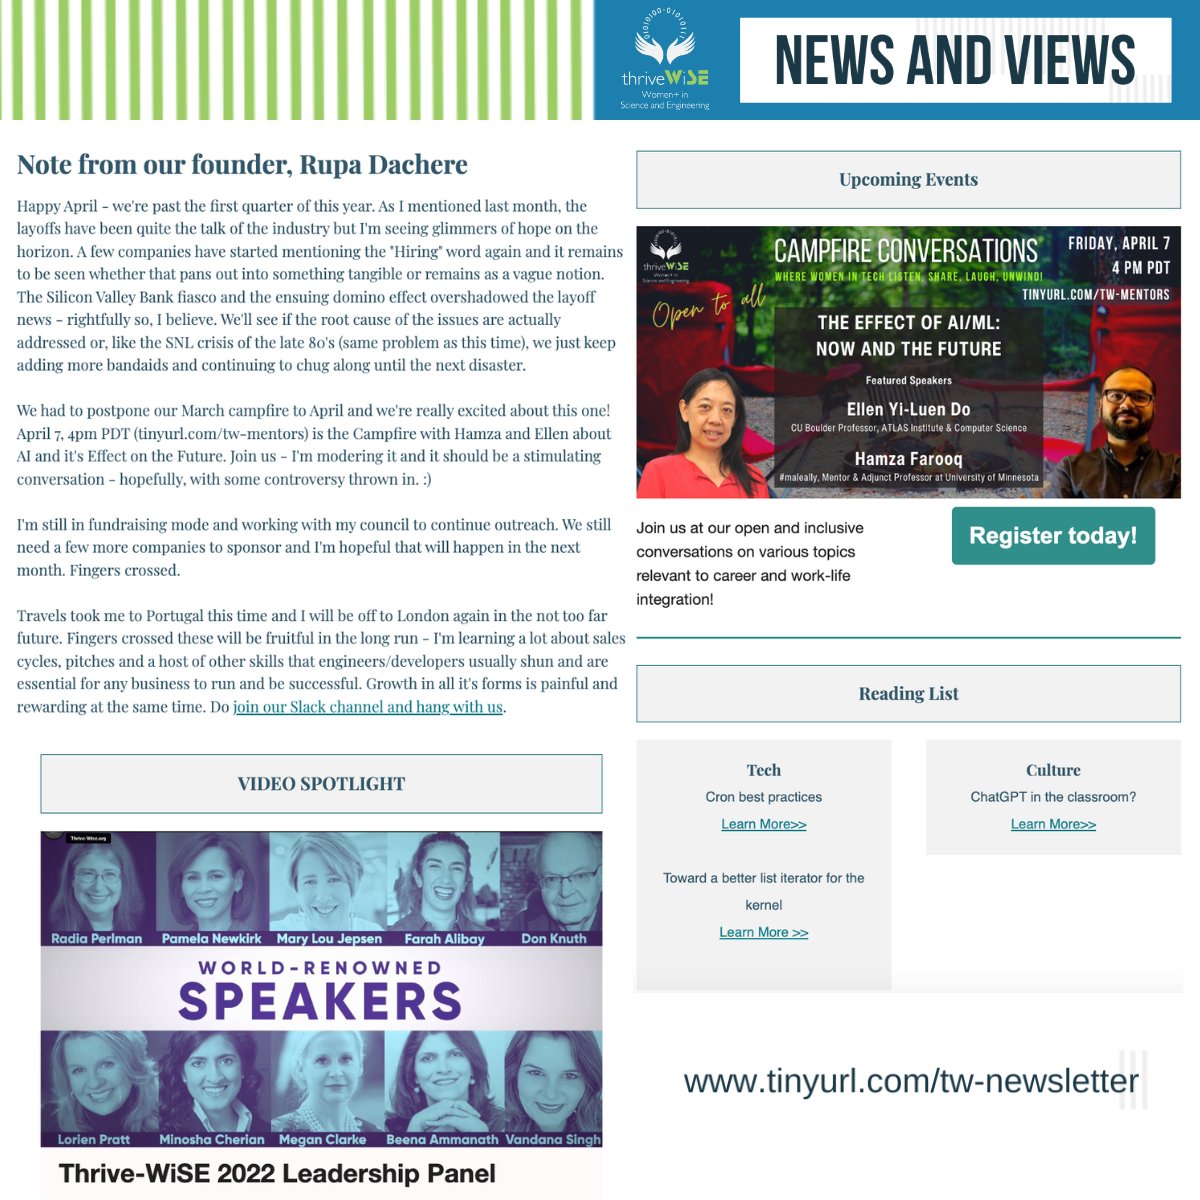 If you missed our April newsletter, subscribe today at tinyurl.com/tw-newsletter! Campfire Conversation on April 7, ChatGPT in the classroom & cron best practices.

#thrive-wise #womeninscience #womeninengineer #womenleader